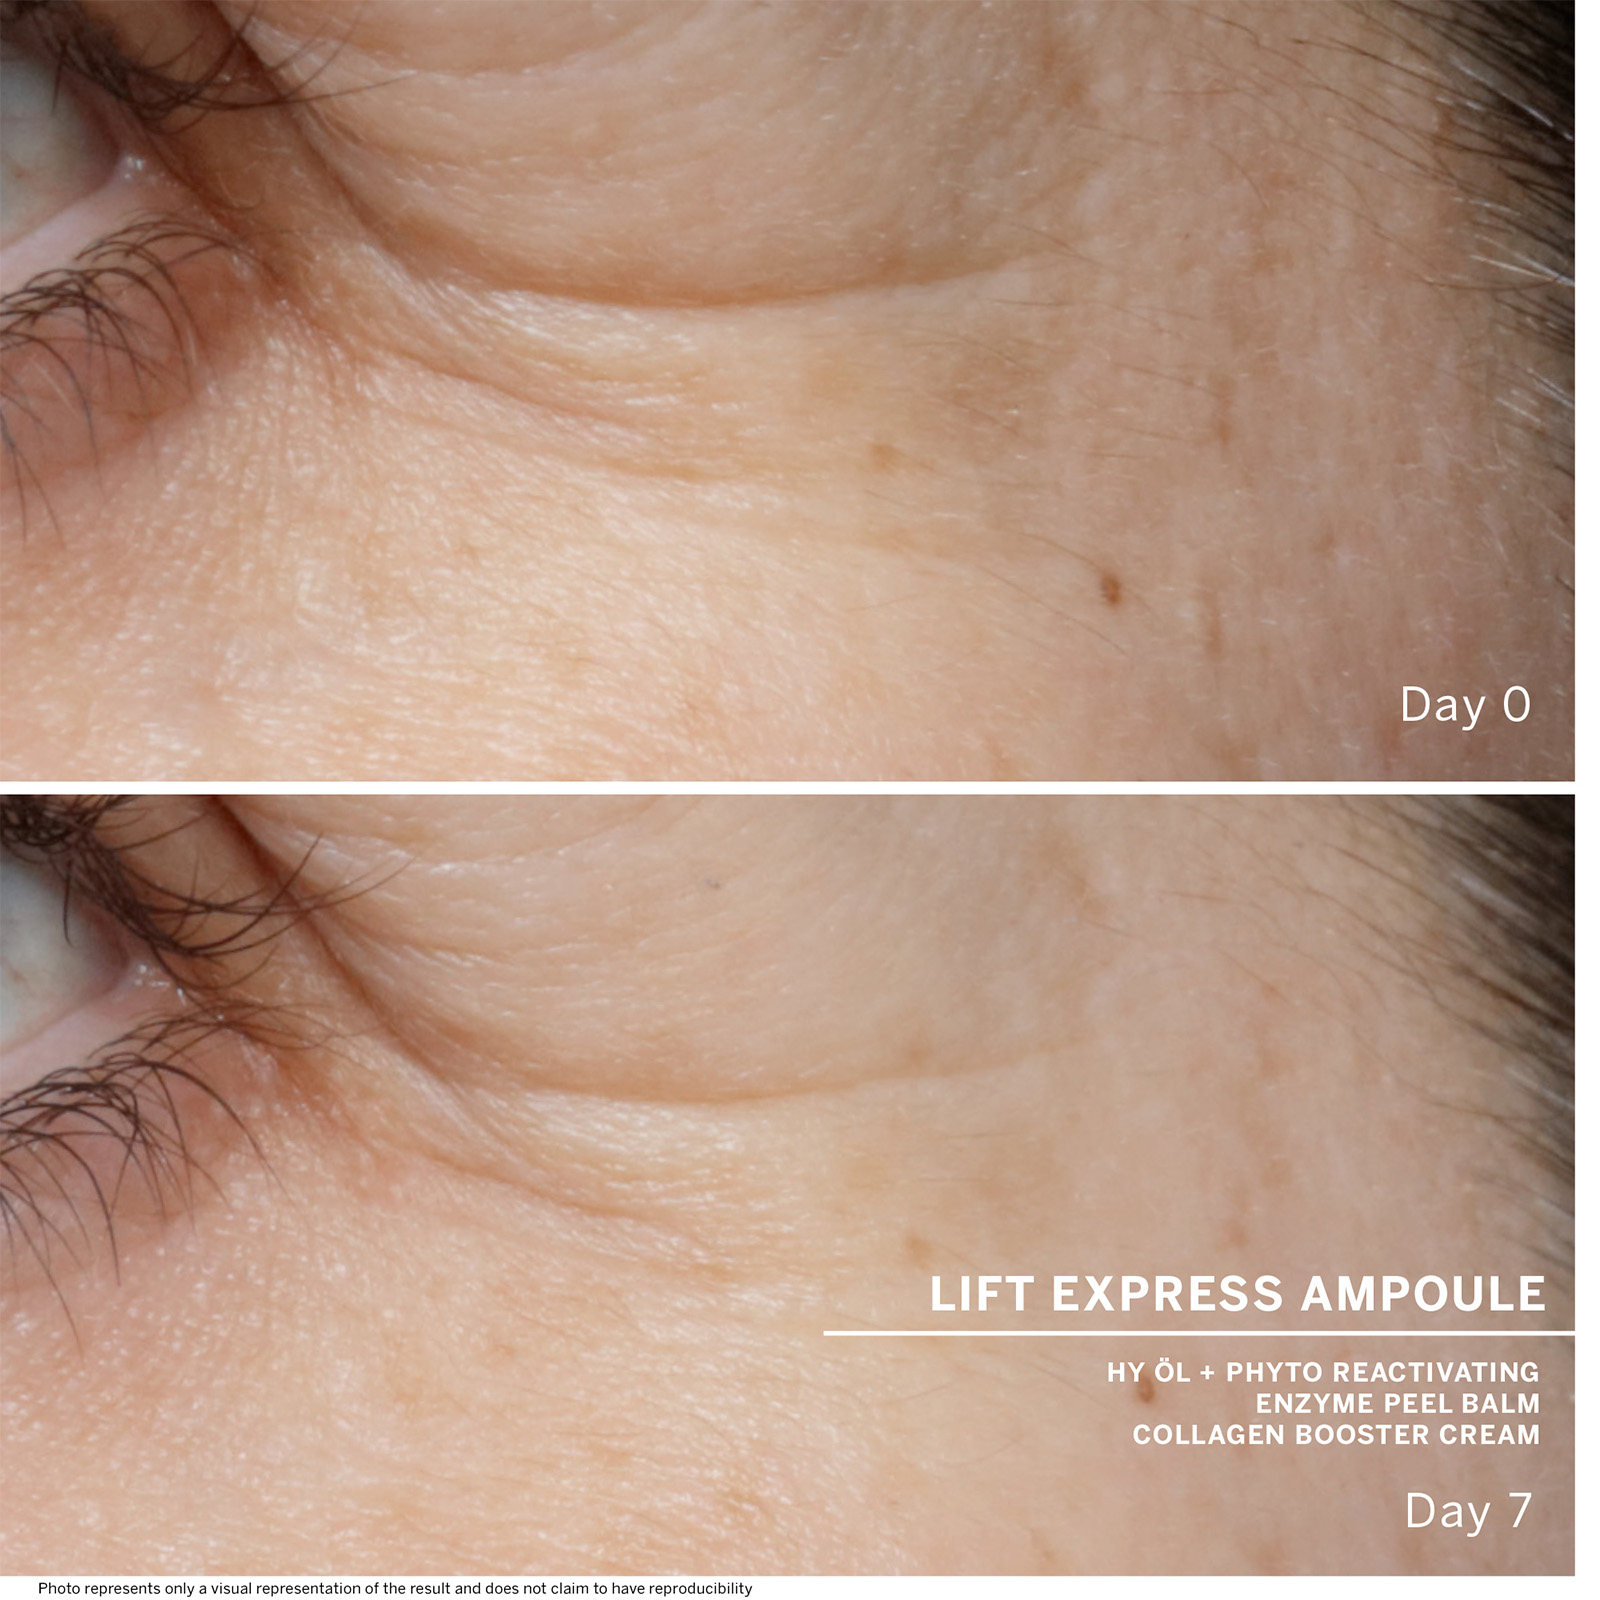 Day 0 Lift Express Ampoule Hy Öl + Phyto Reactivating Enzyme Peel Balm Collagen Booster Cream (Description: Skin before use) Day 7 Photo (Description: Crows feet are visibly reduced) Represents Only A Visual Representation Of The Result And Does Not Claim To Have Reproducibility 